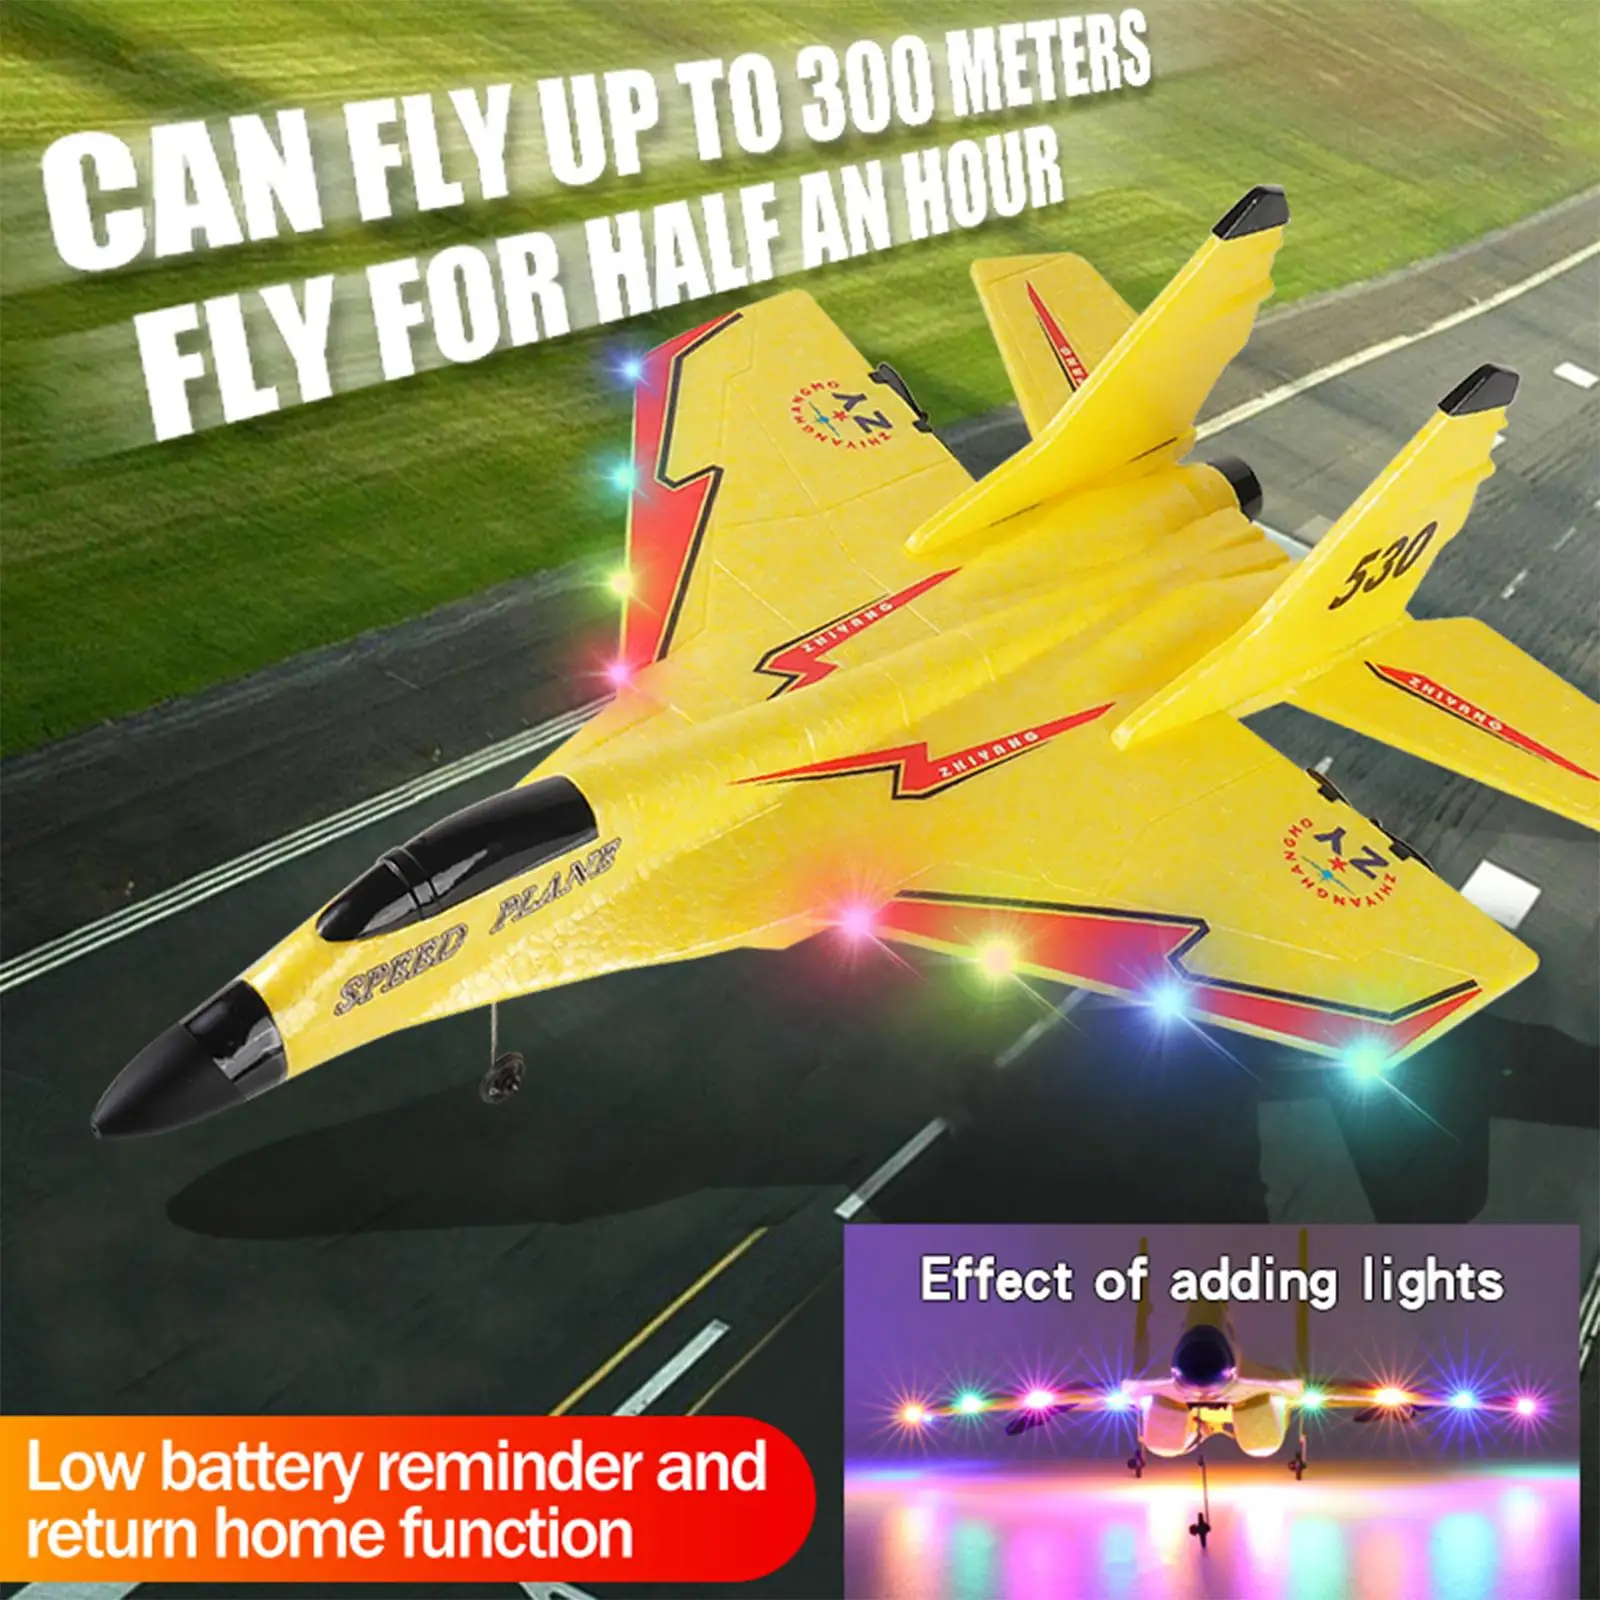 Foam RC Plane Glider Easy to Fly High Speed Motor Outdoor Game Remote Control Aircraft for Adults Boys Kids Christmas Gifts